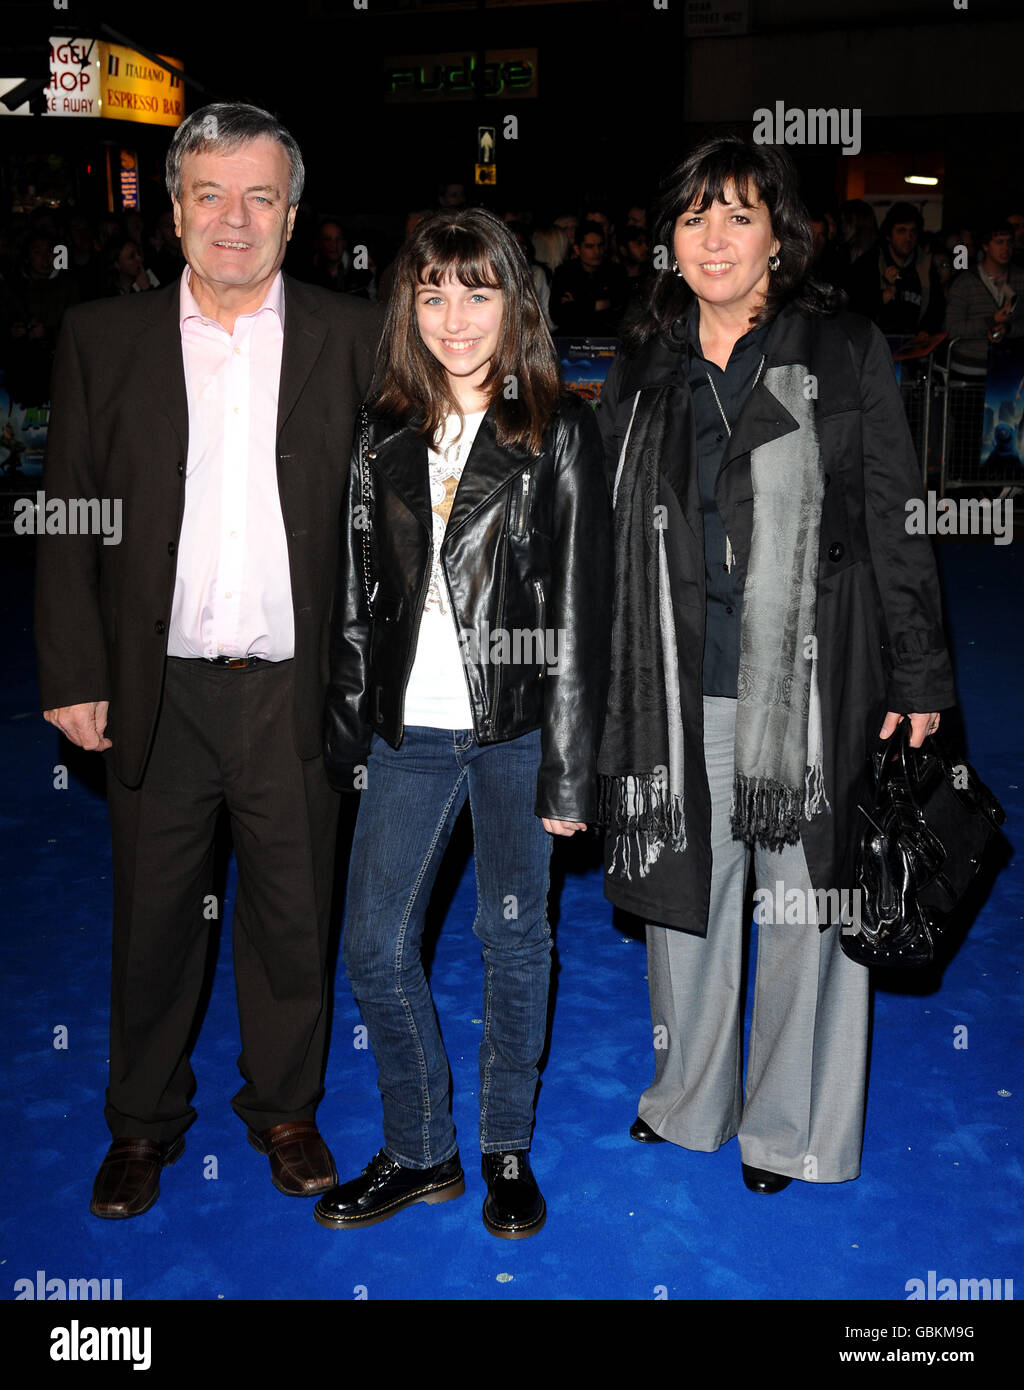 Tony Blackburn (left), wife Debbie (right) and daughter Victoria arriving for the premiere of Monsters Vs Aliens at the Vue West End, Leicester Square, London. Stock Photo